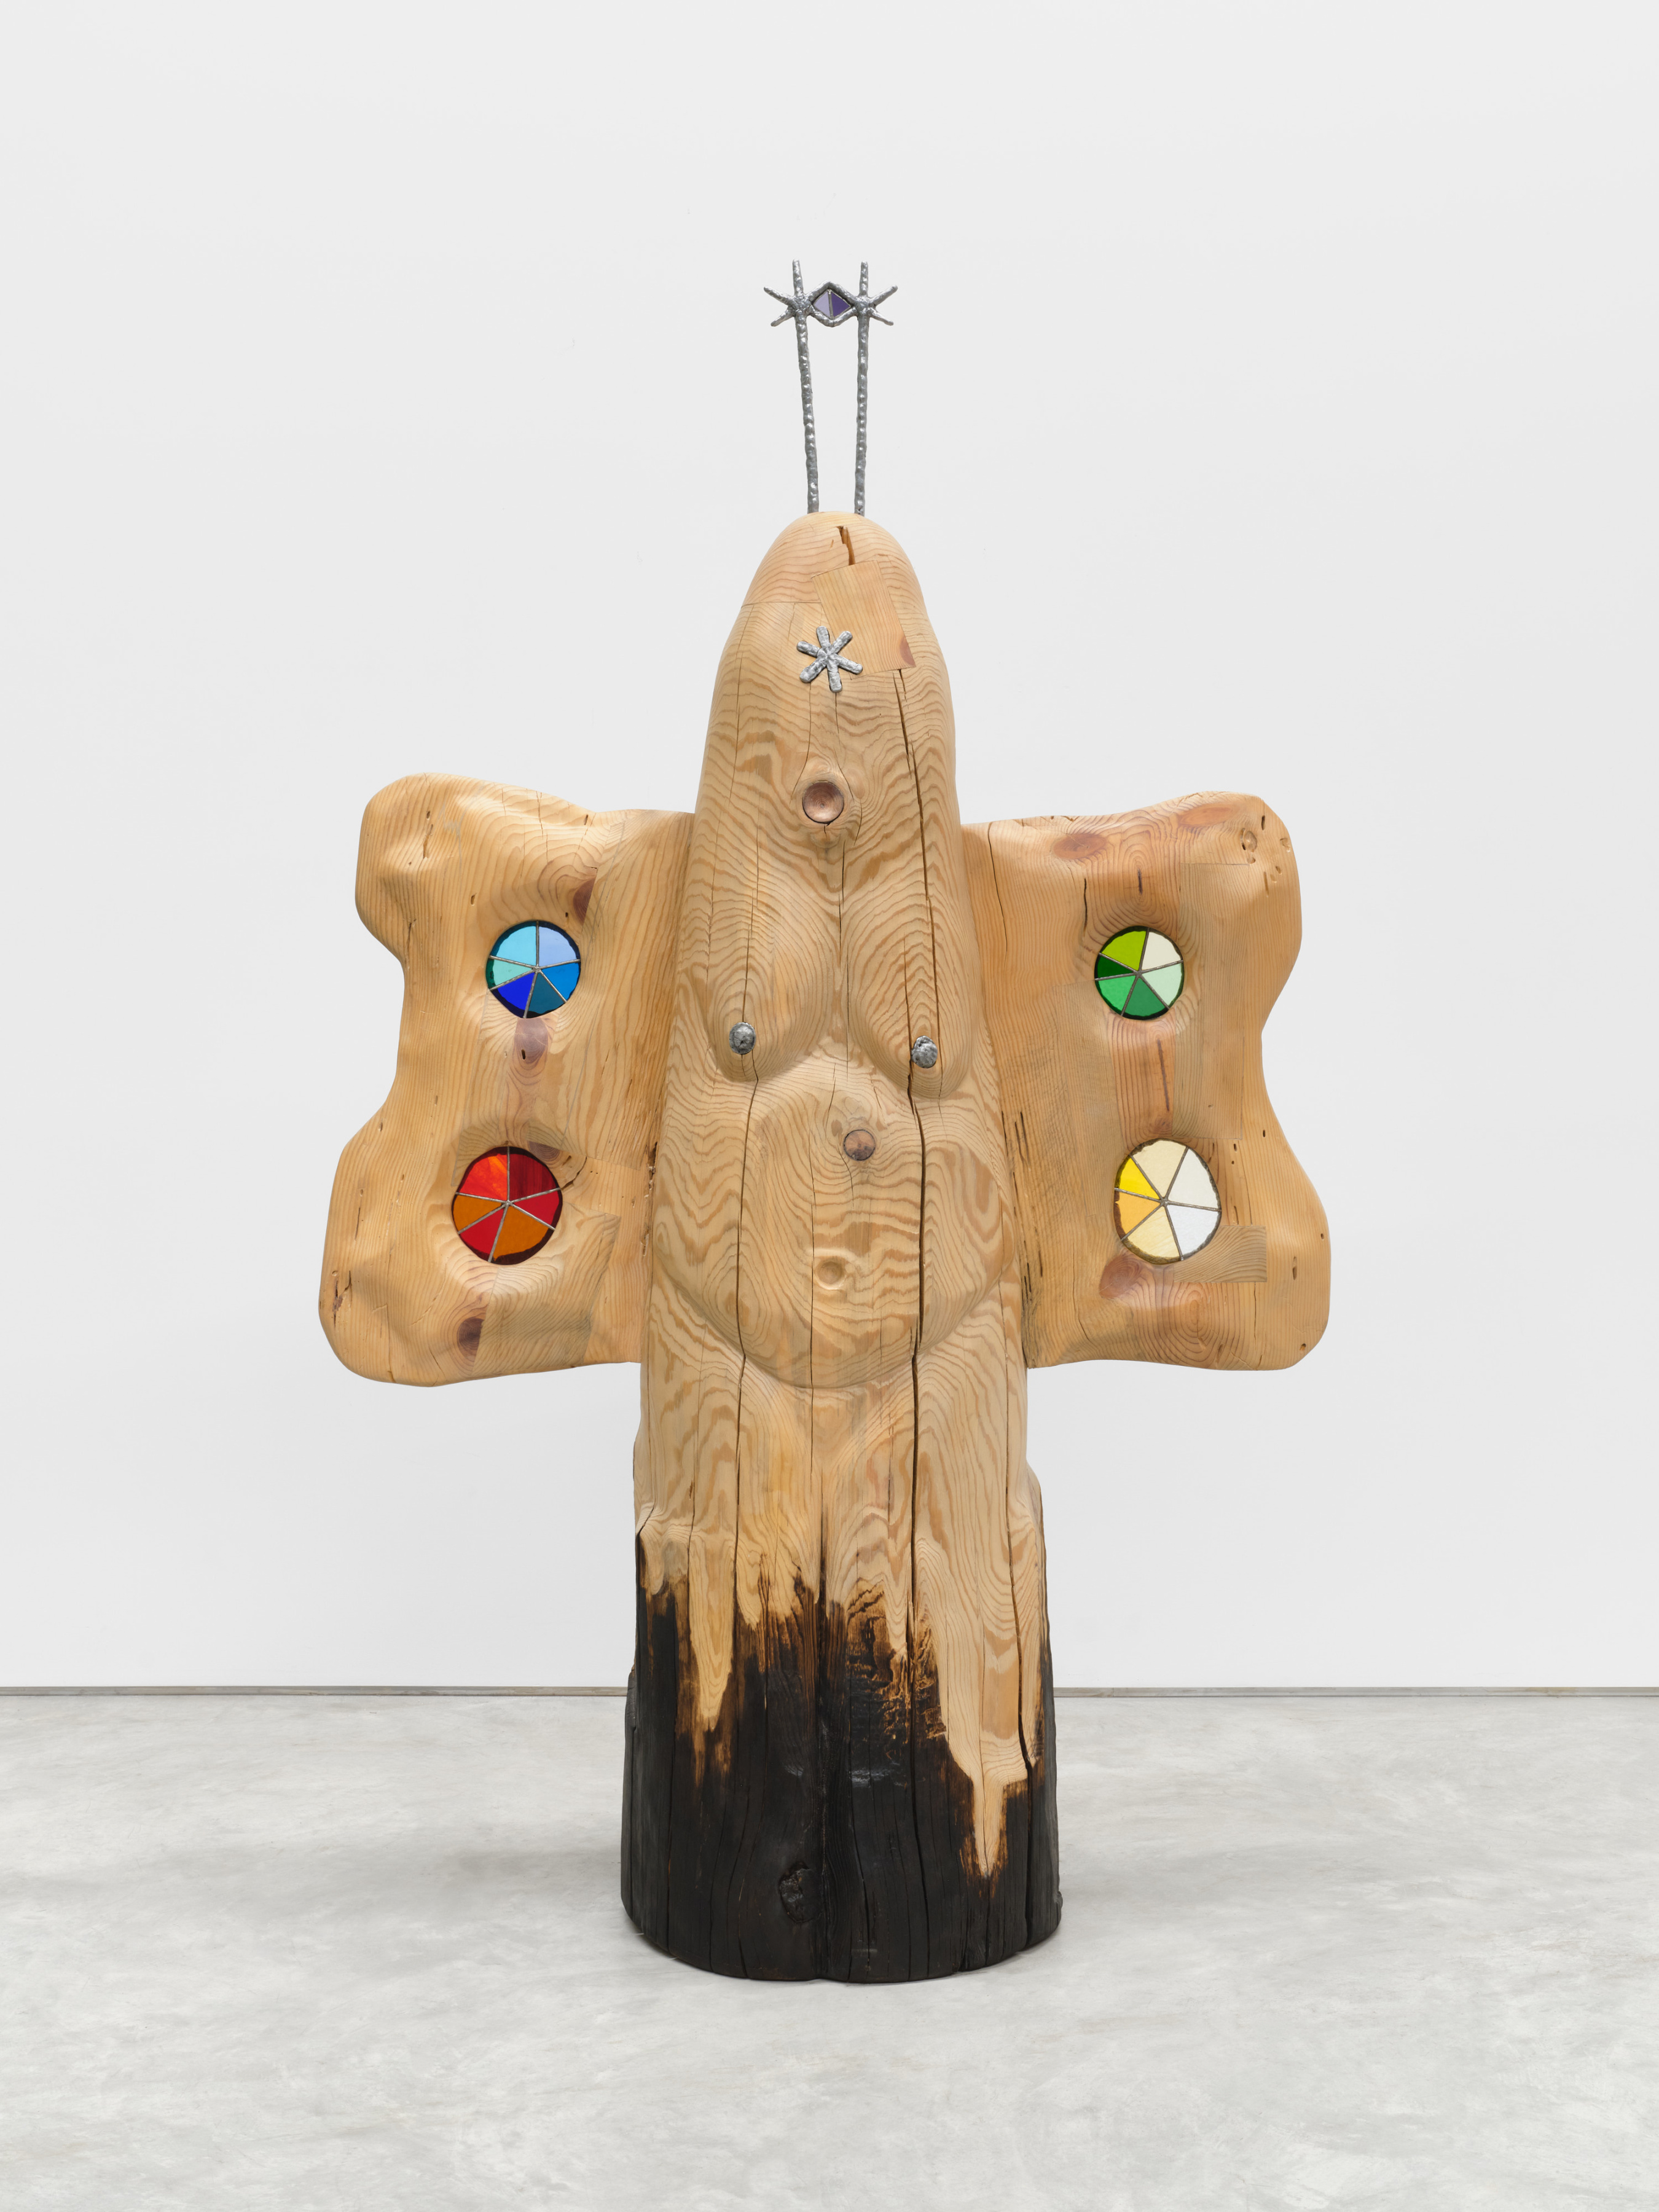 A carved anthropomorphic wooden sculpture at human scale with wings that have stained glass windows and two metal antennae. 